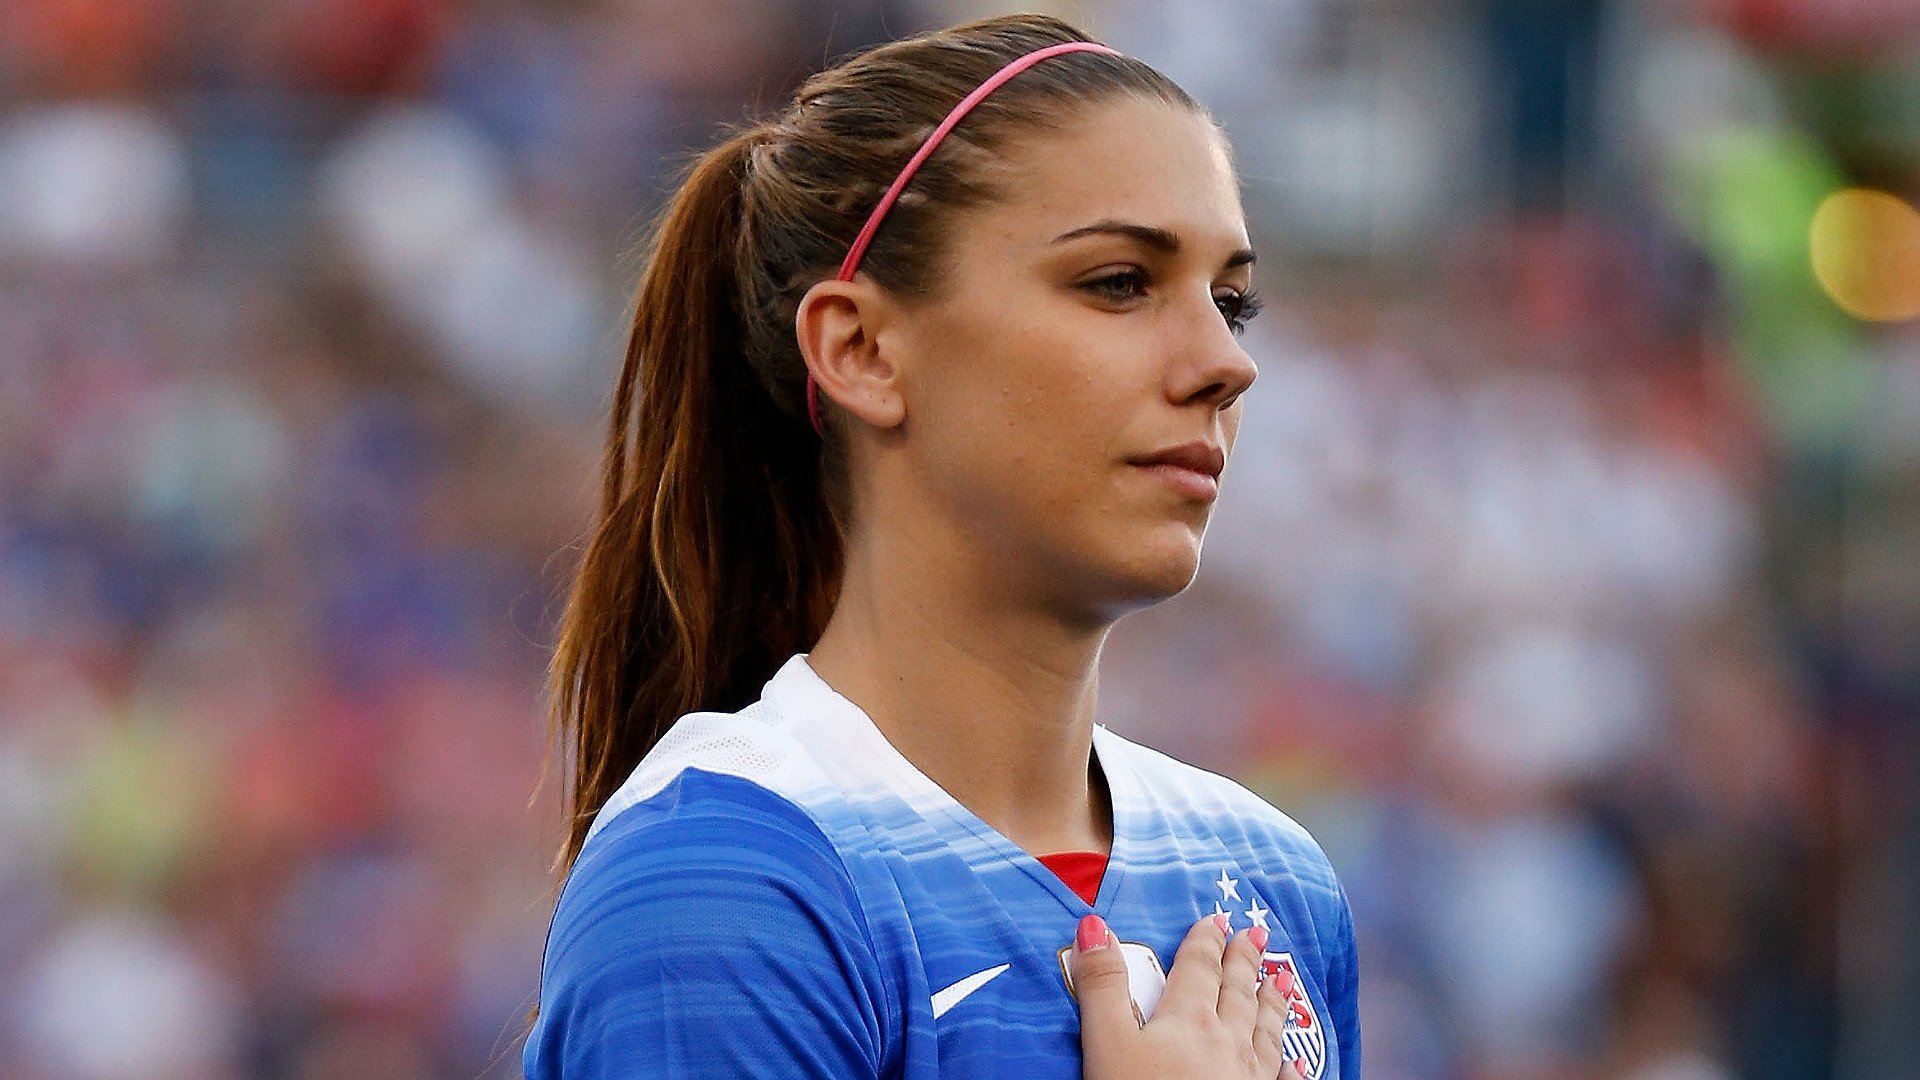 HD wallpaper of soccer player in blue jersey, poised for the national anthem, suitable as a desktop background.